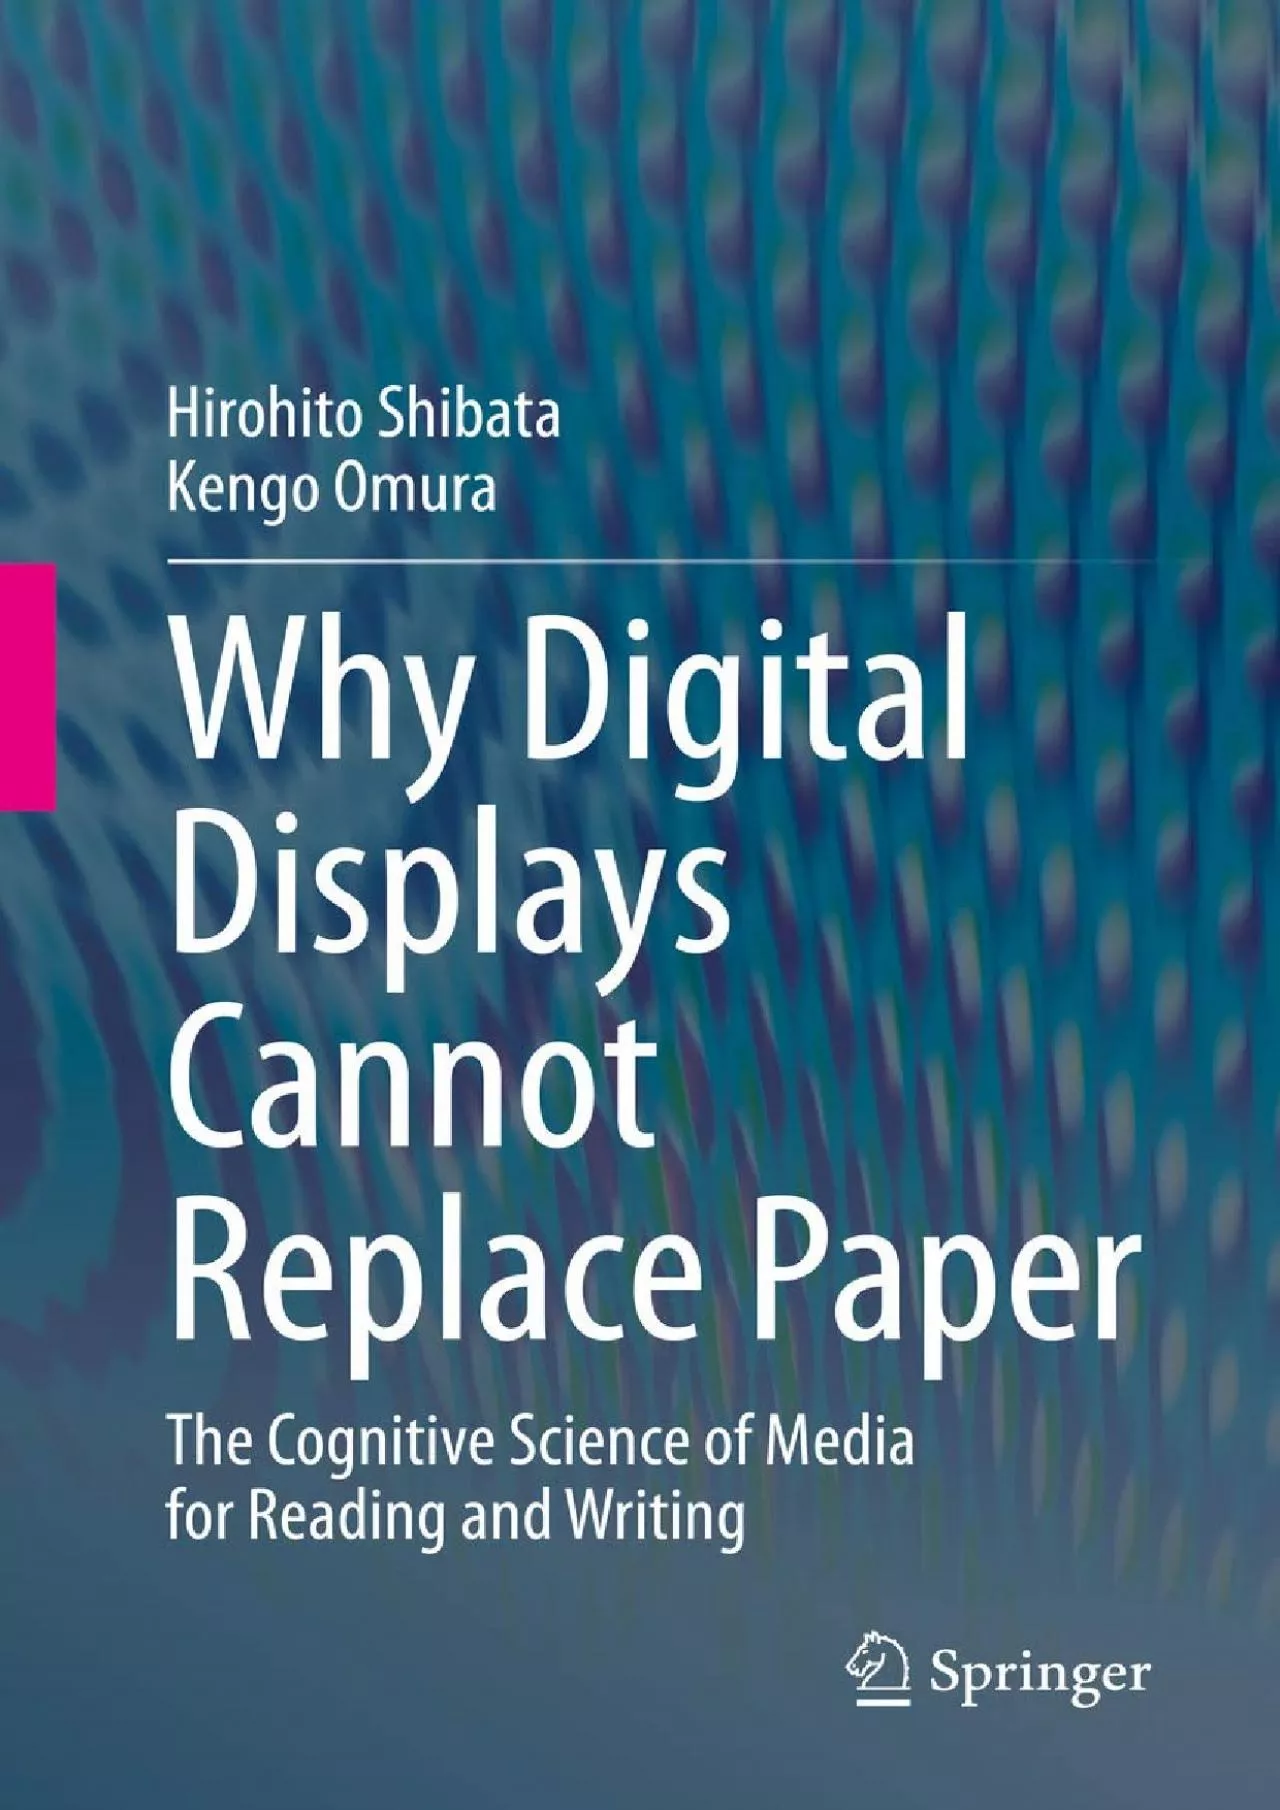 (READ)-Why Digital Displays Cannot Replace Paper The Cognitive Science of Media for Reading